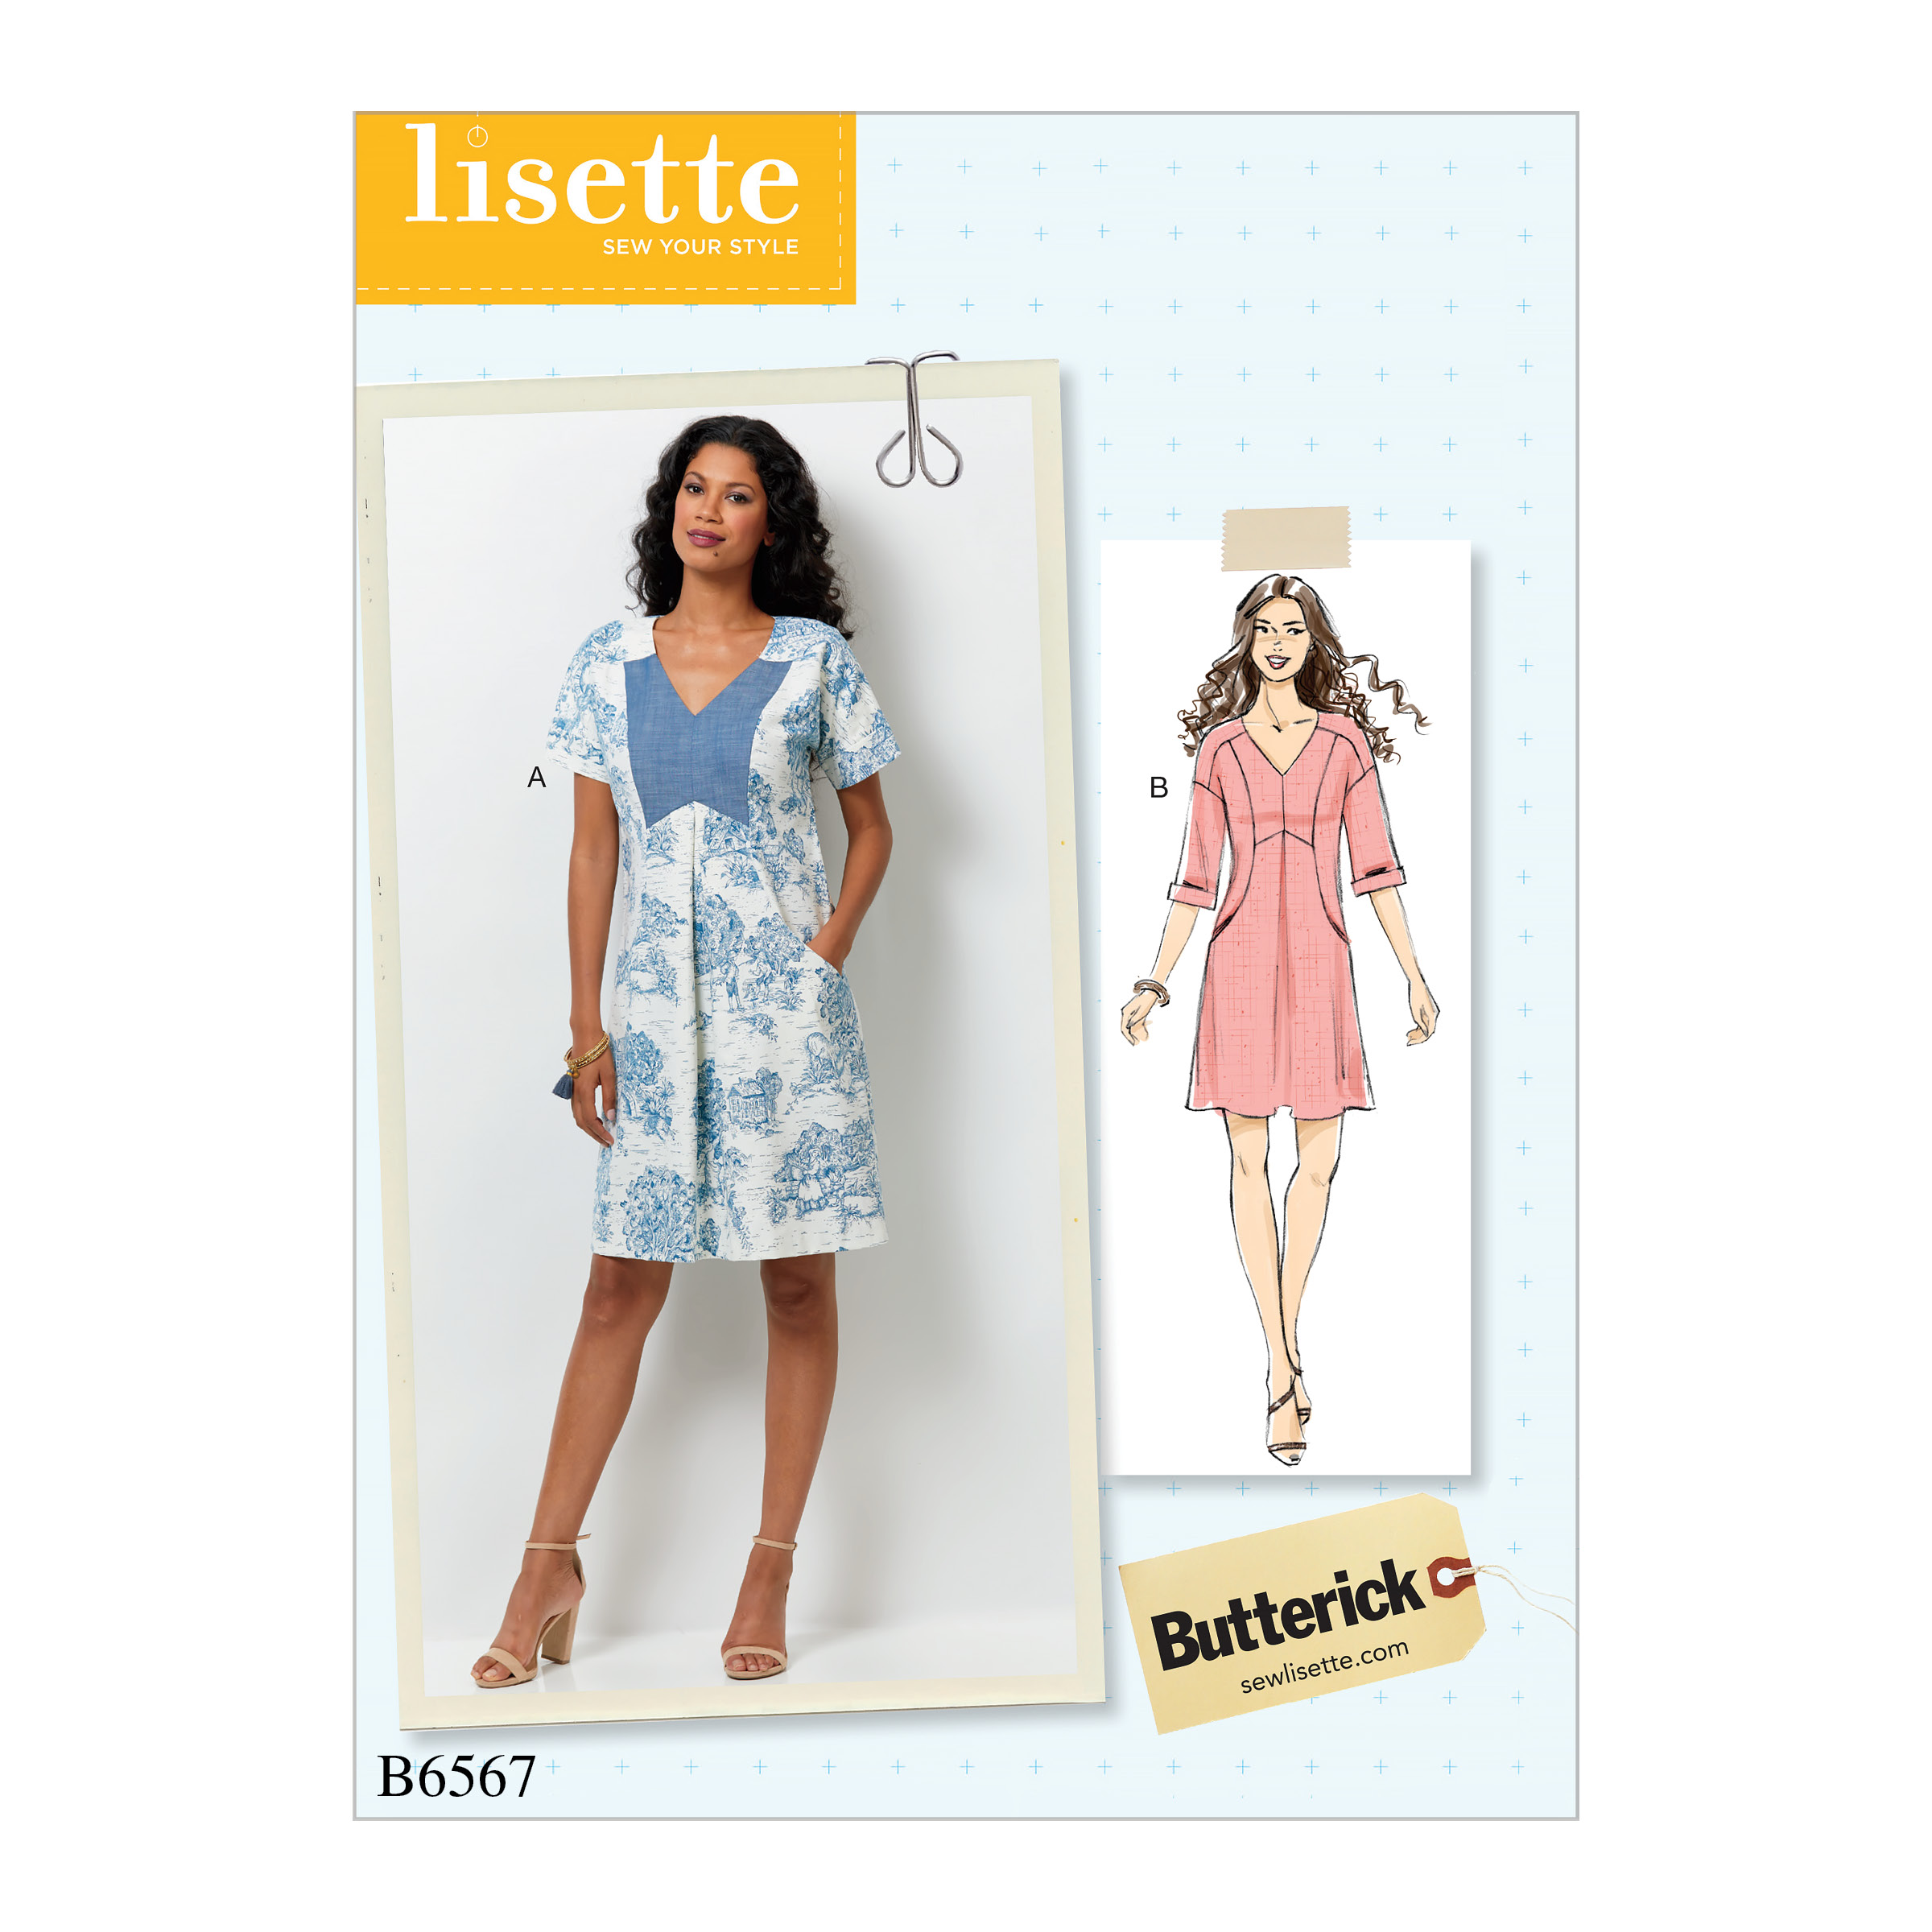 Butterick Sewing Pattern B6561 Misses' Top